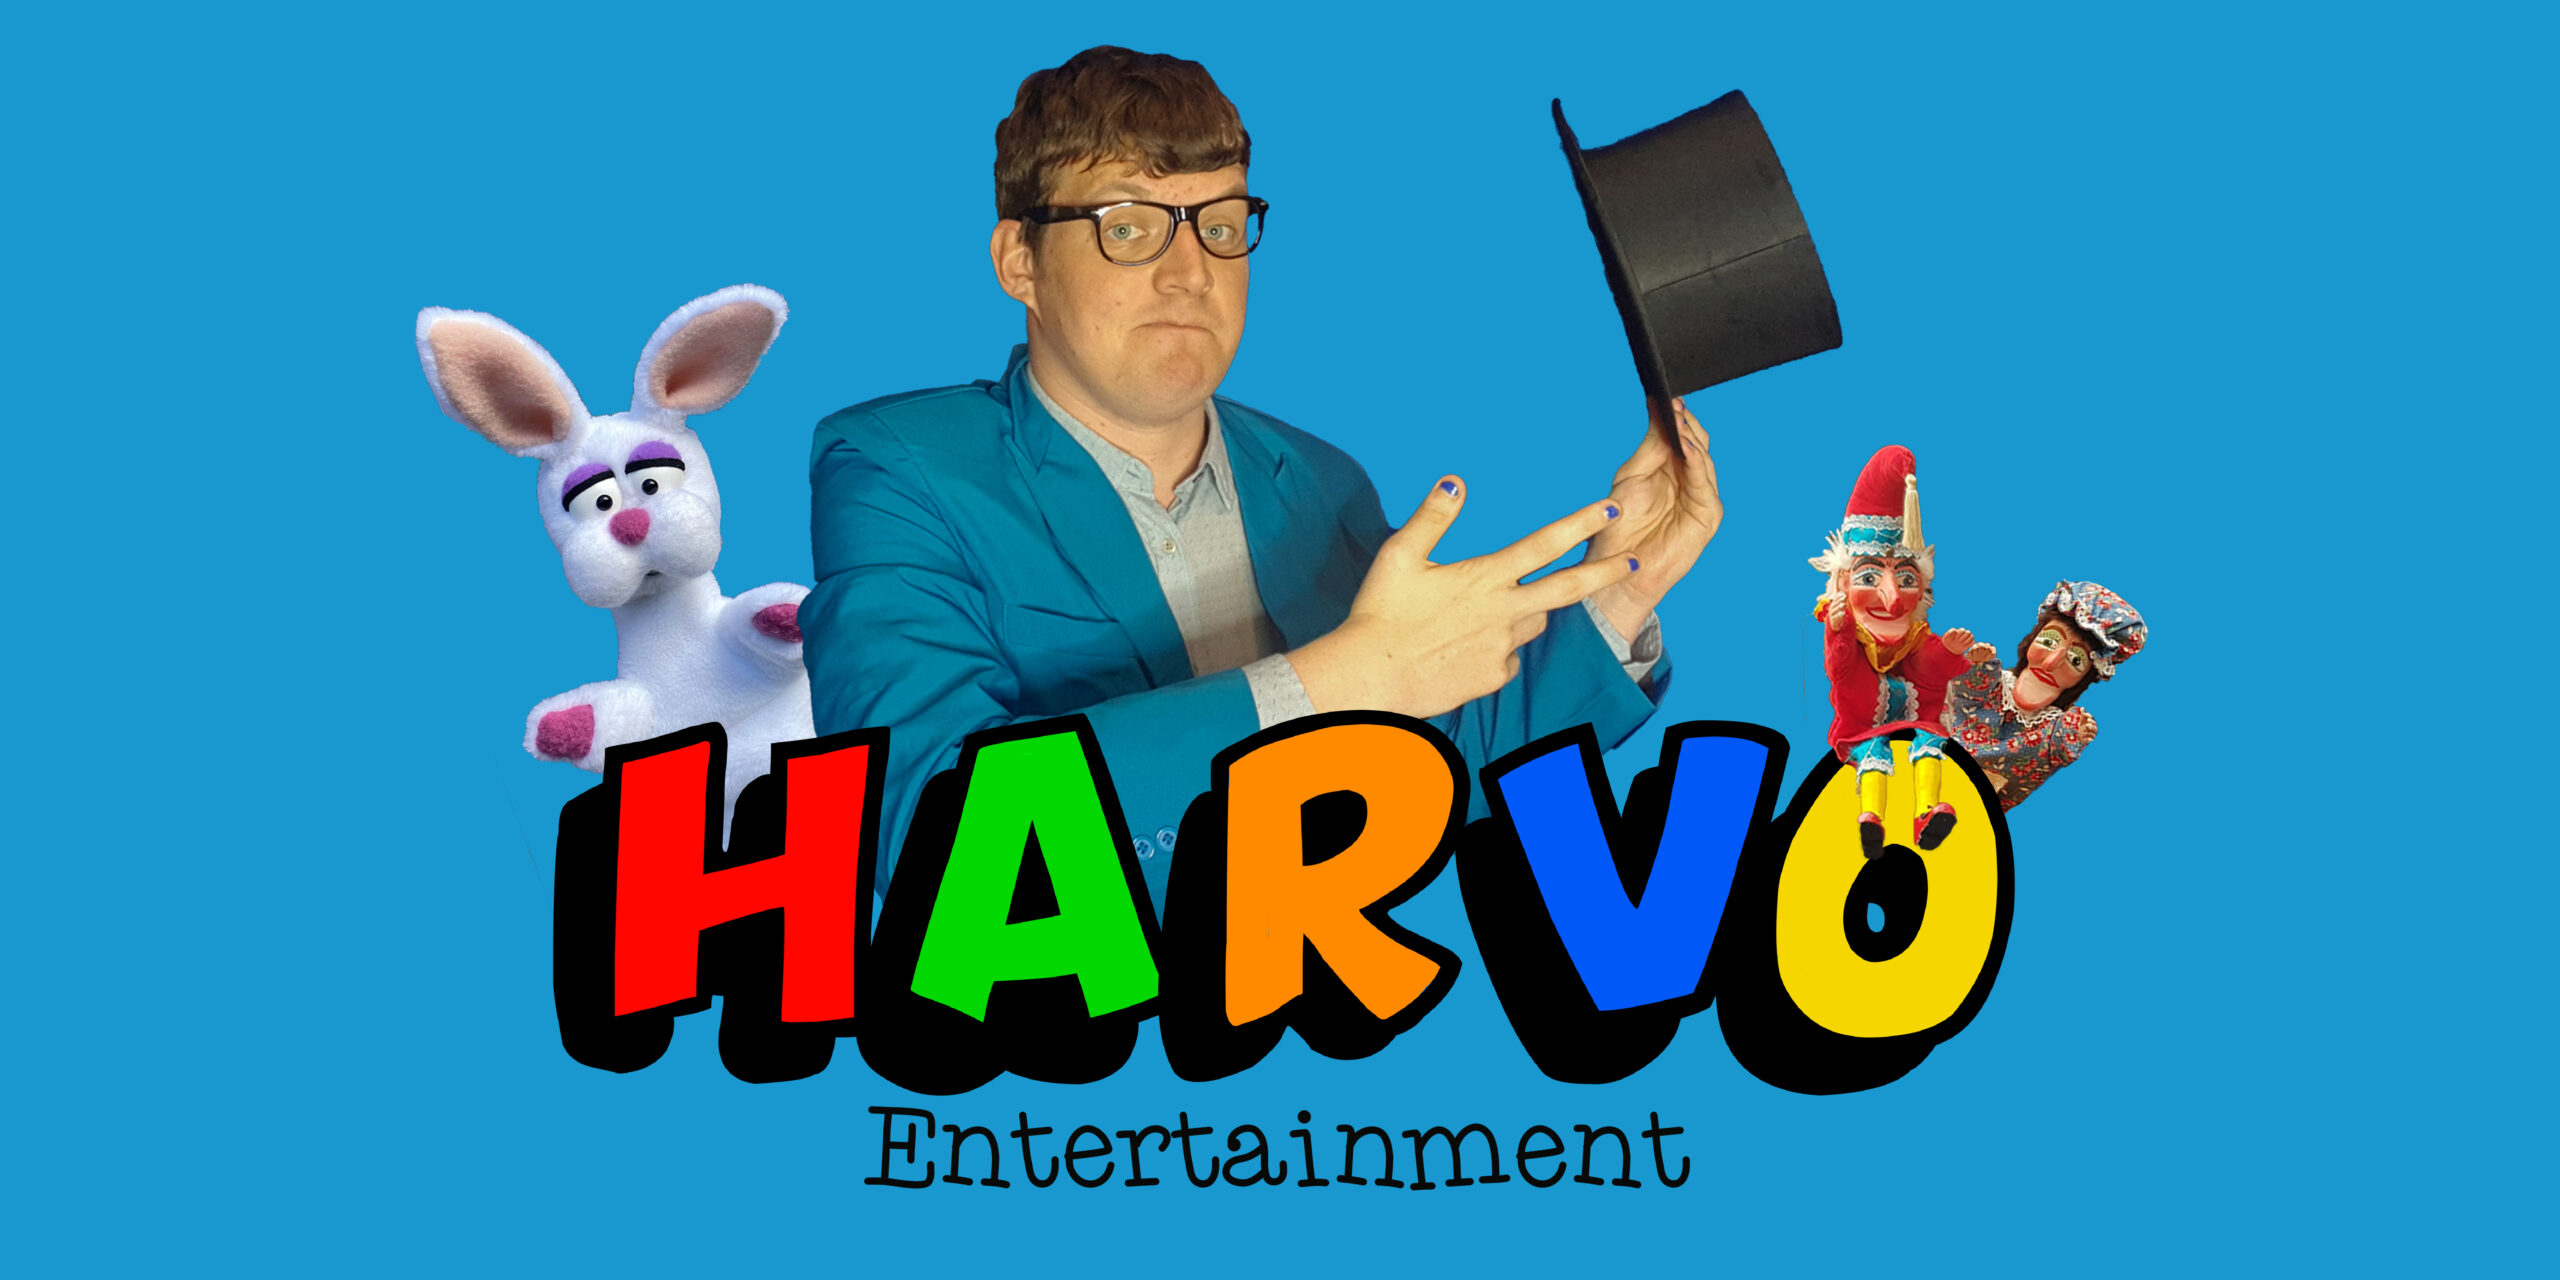 Harvo Entertainment Logo with Harvo, Flopper, Punch and Judy behind it